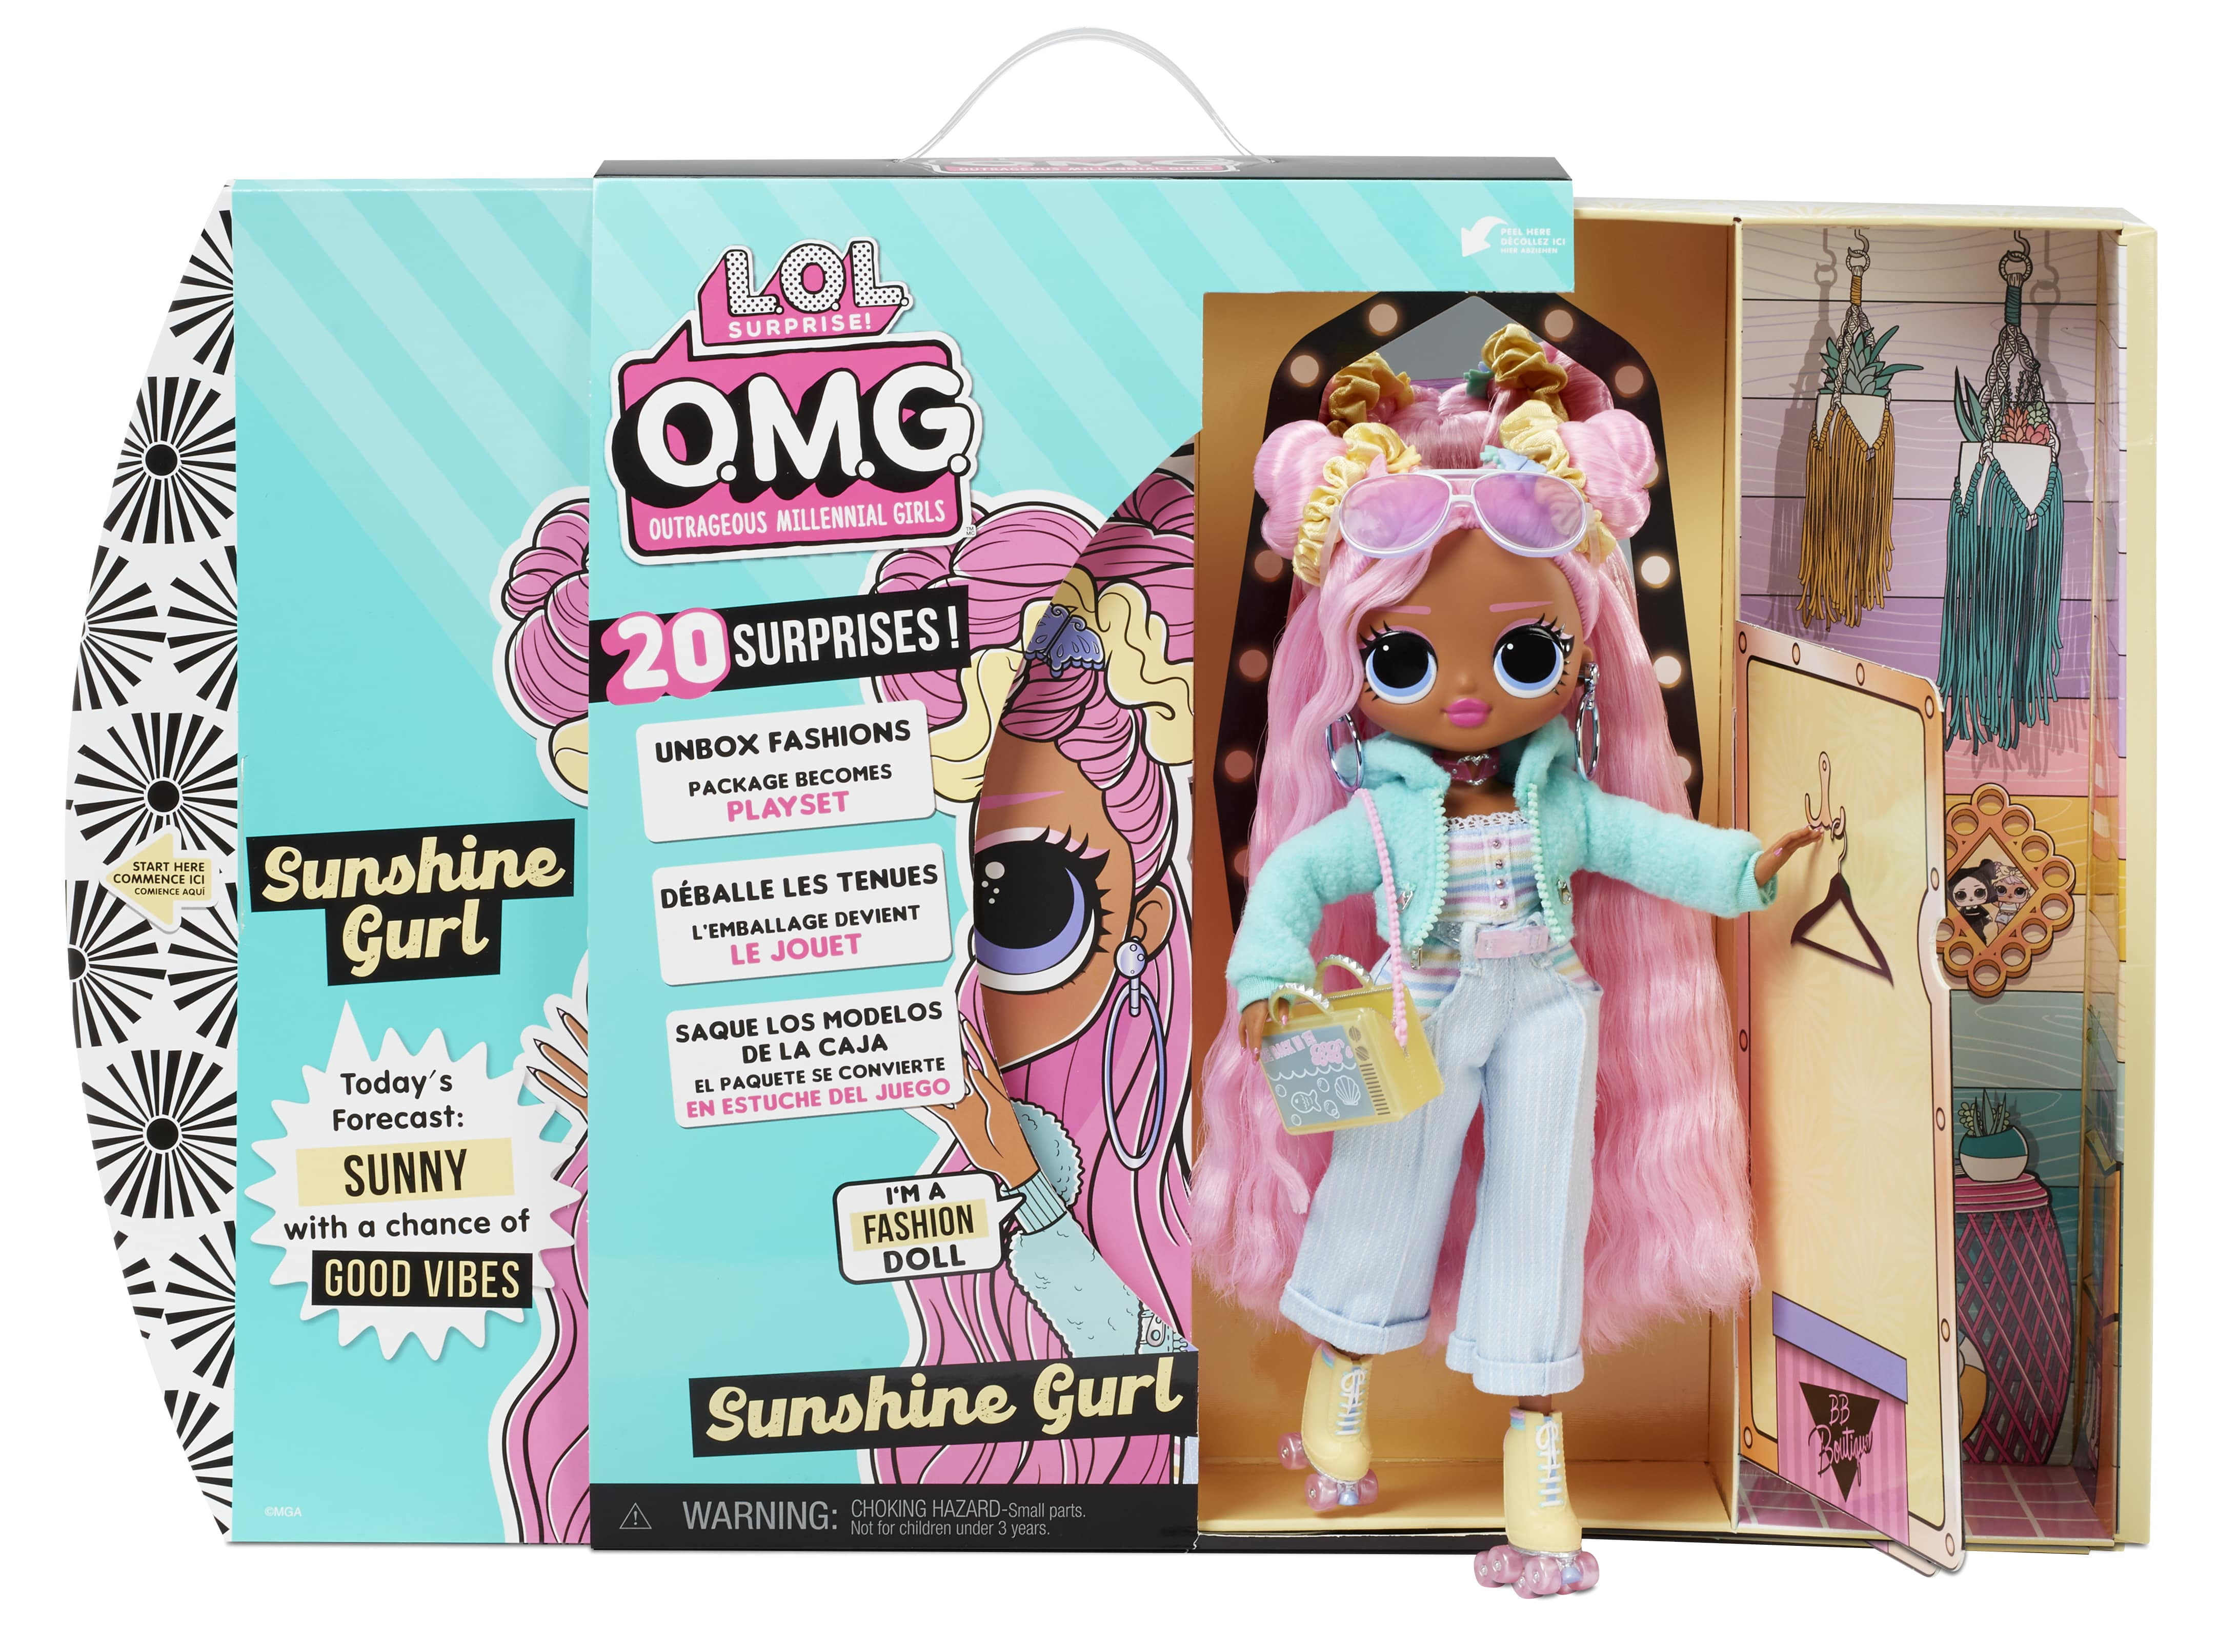 Surprise With 8 Surprises & Collectable Fashion Dolls for Girls L.O.L 1 